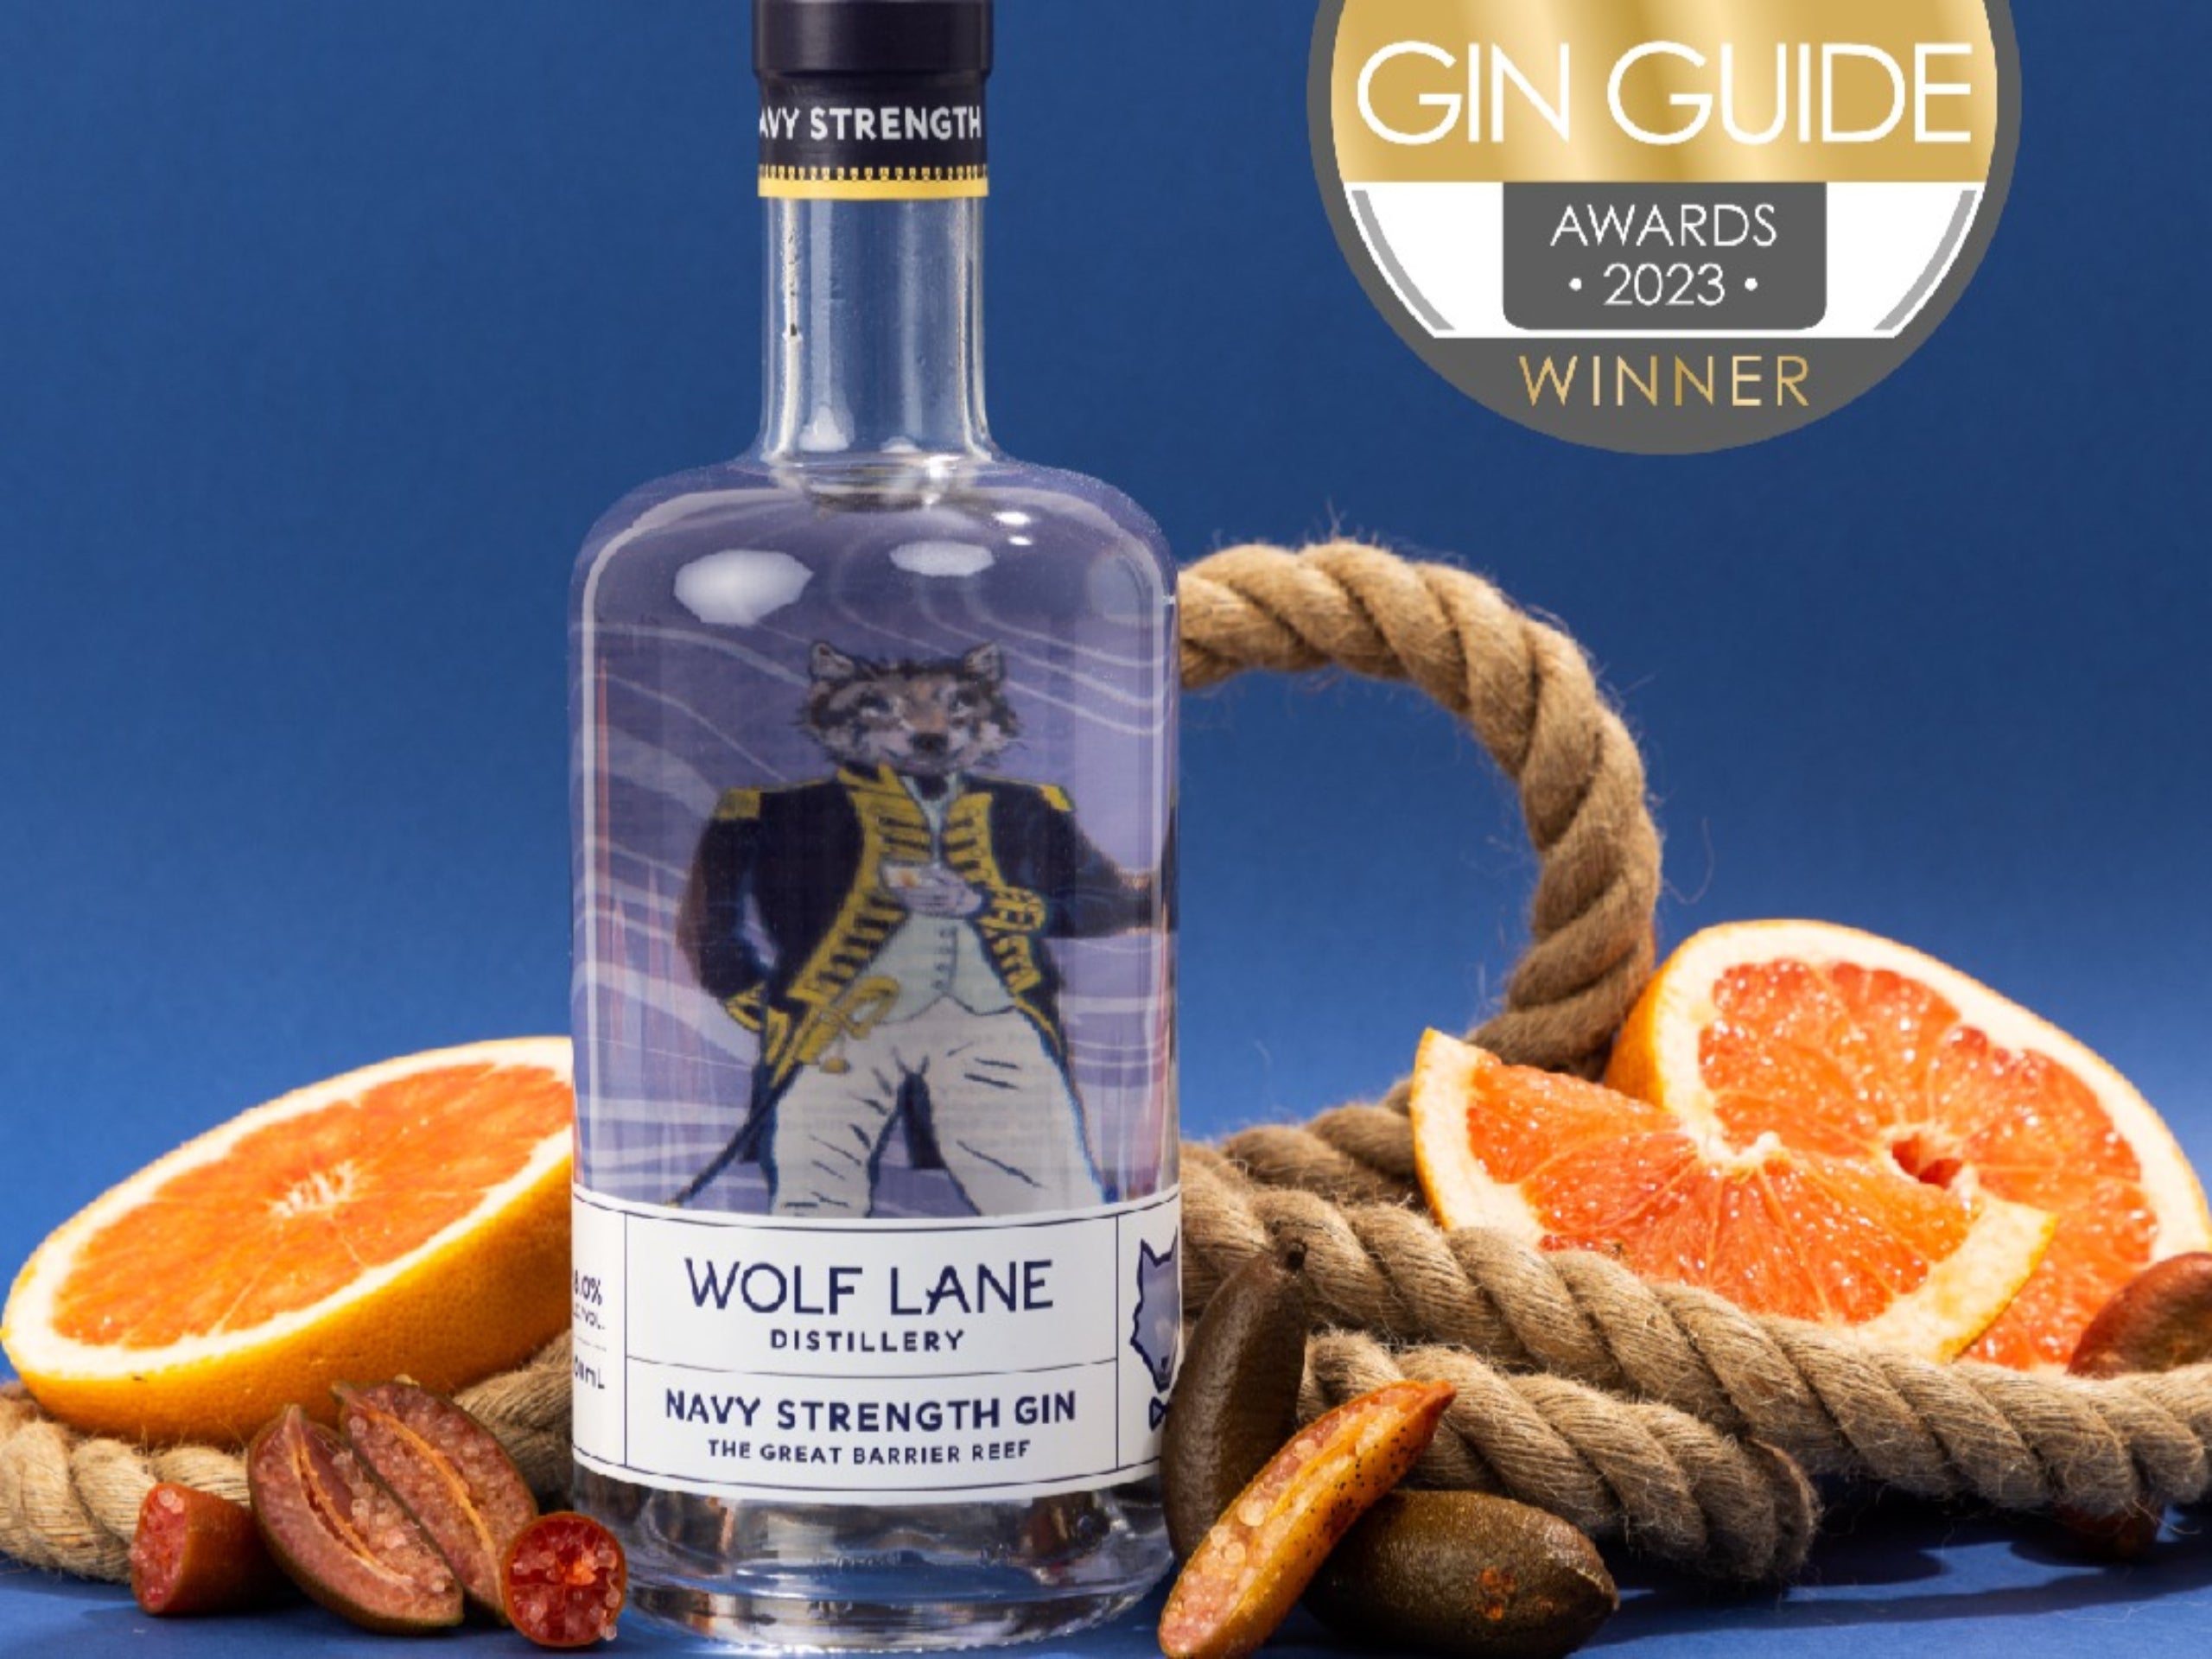 Our Navy Strength won the Gin Guide Award 2023!